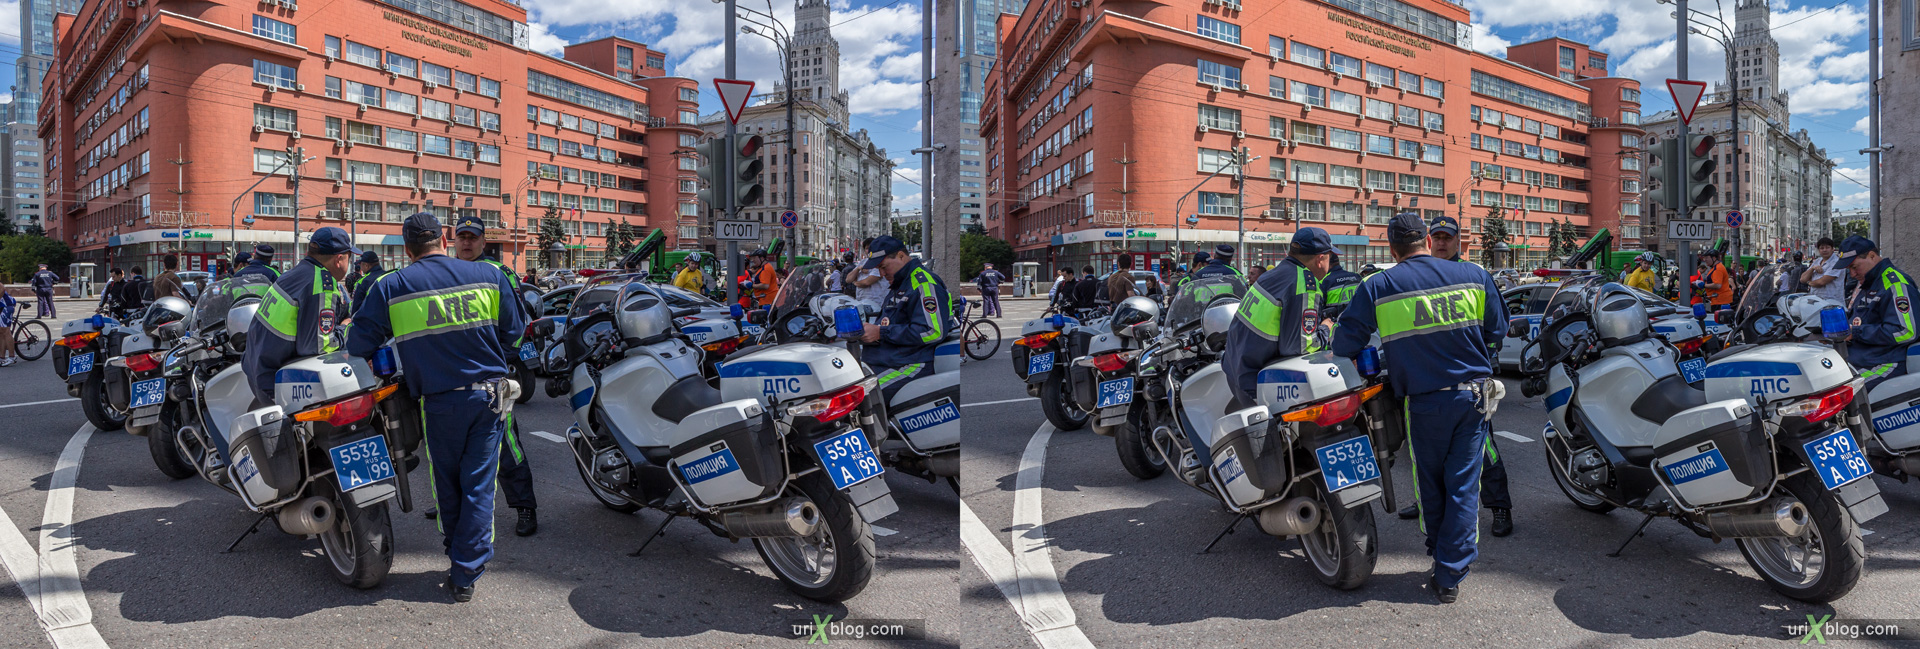 2014, bicycle, parade, Moscow, Russia, Garden Ring avenue, summer, june, 3D, stereo pair, cross-eyed, crossview, cross view stereo pair, stereoscopic